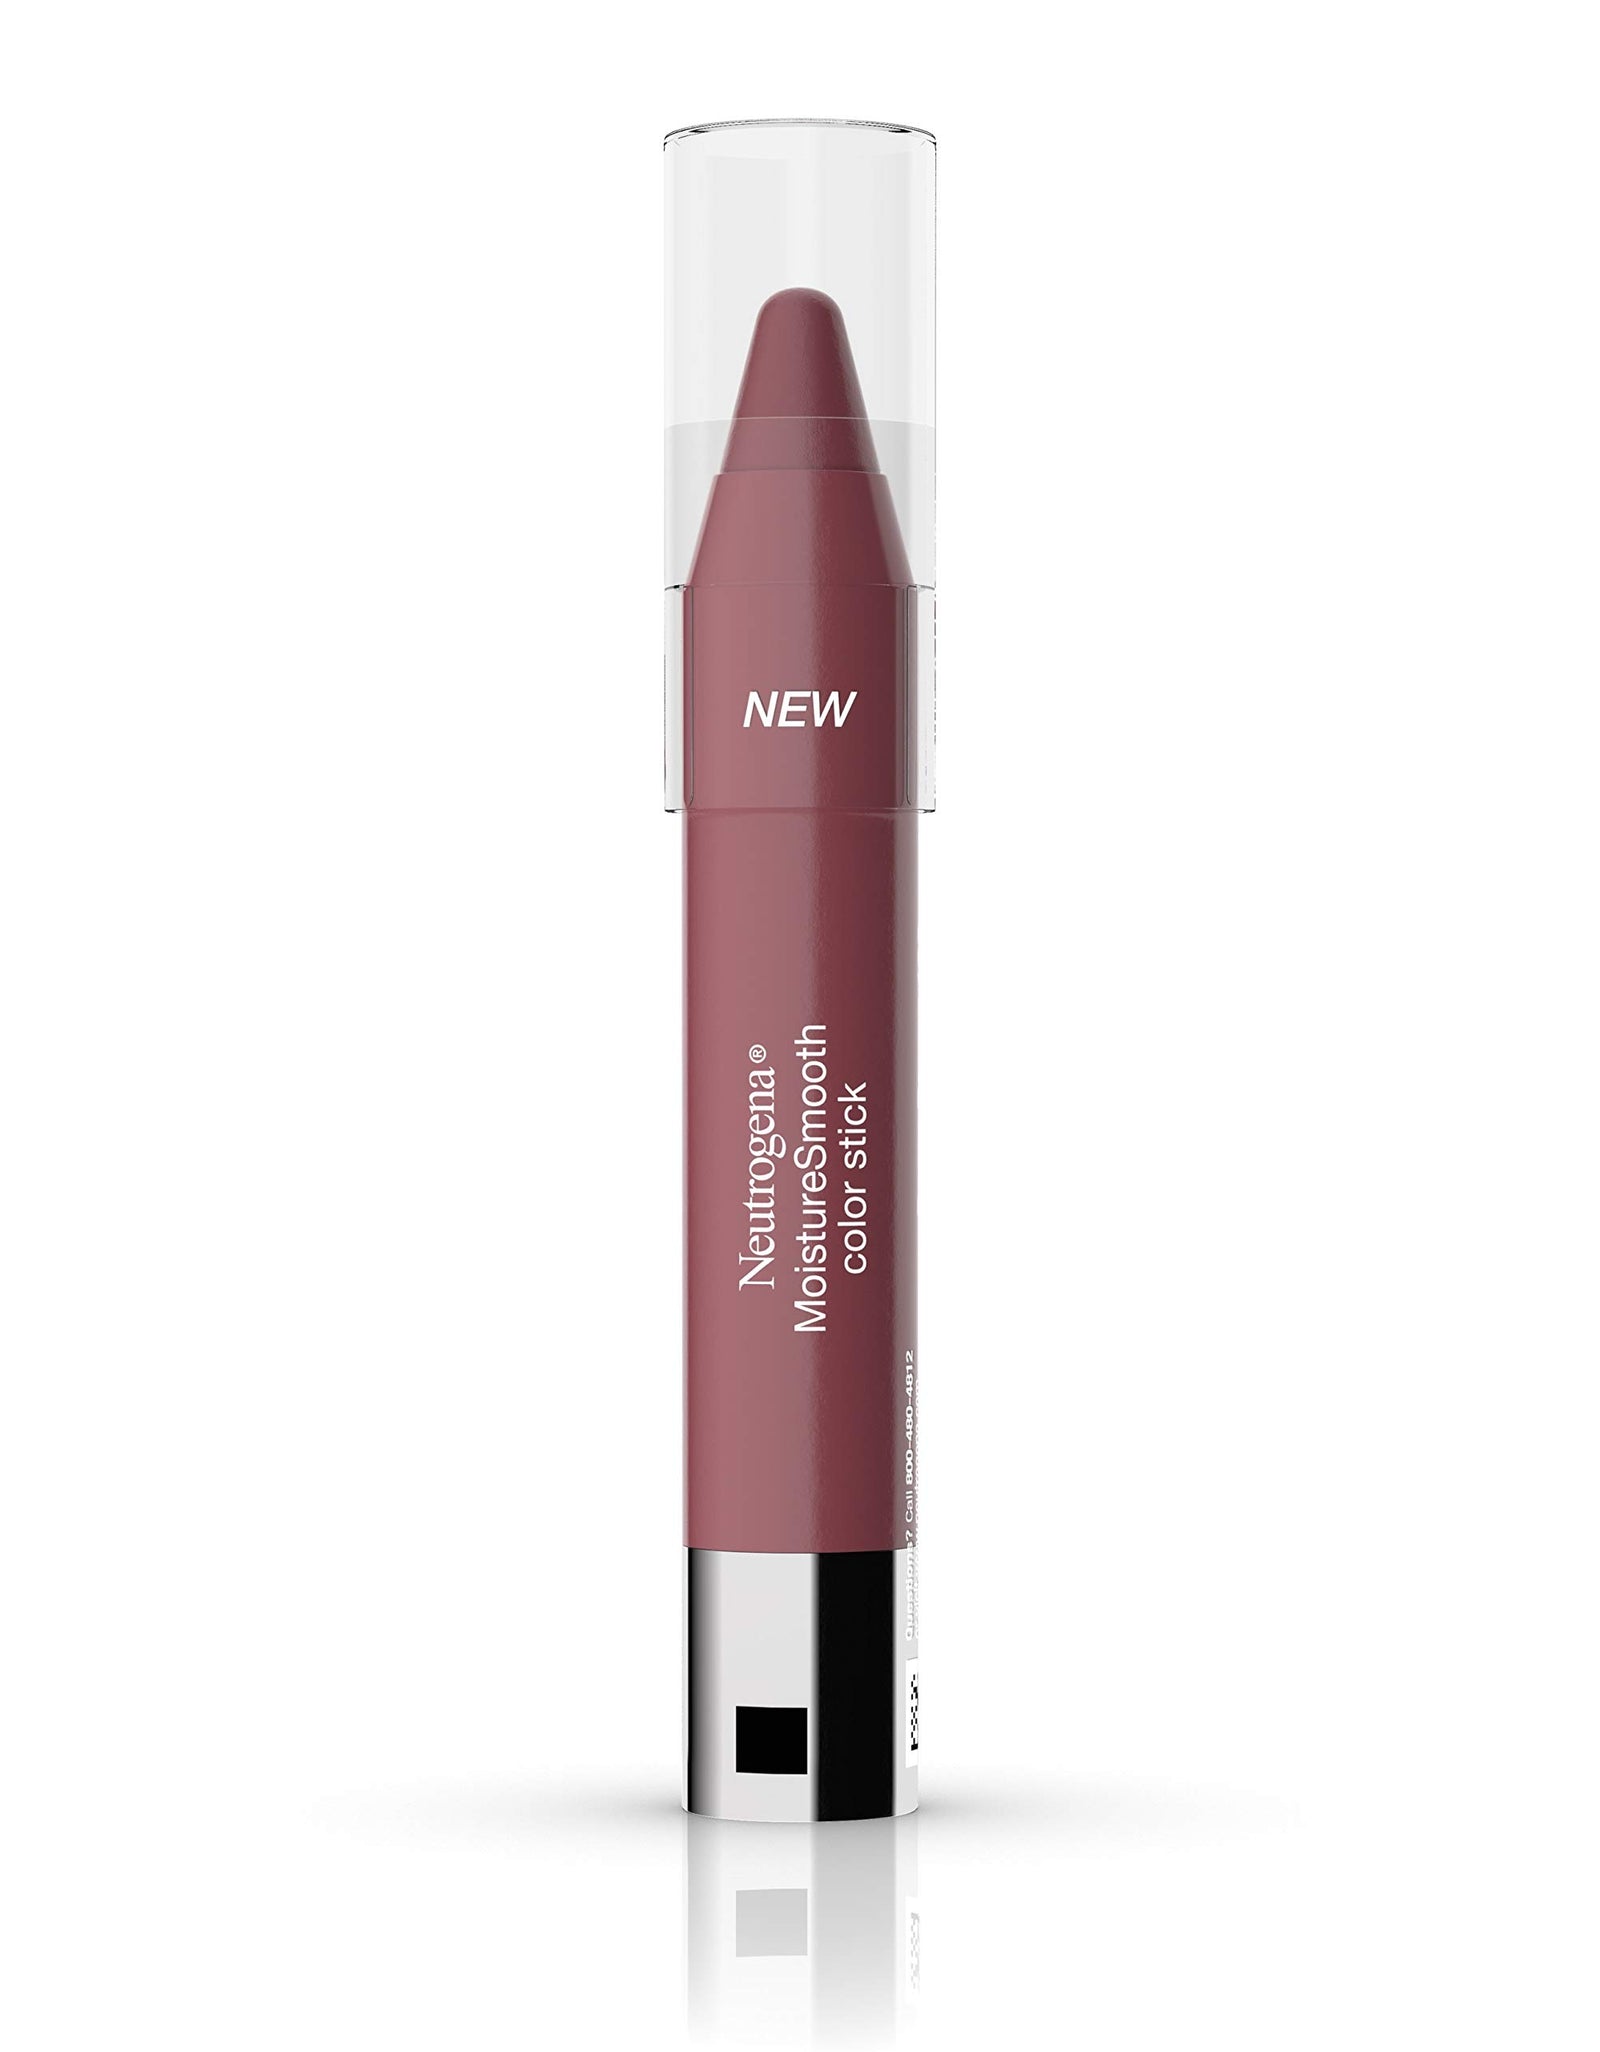 Neutrogena MoistureSmooth Color Stick for Lips, Moisturizing and Conditioning Lipstick with a Balm-Like Formula, Nourishing Shea Butter and Fruit Extracts, 120 Berry Brown,.011 oz (Pack of 36)